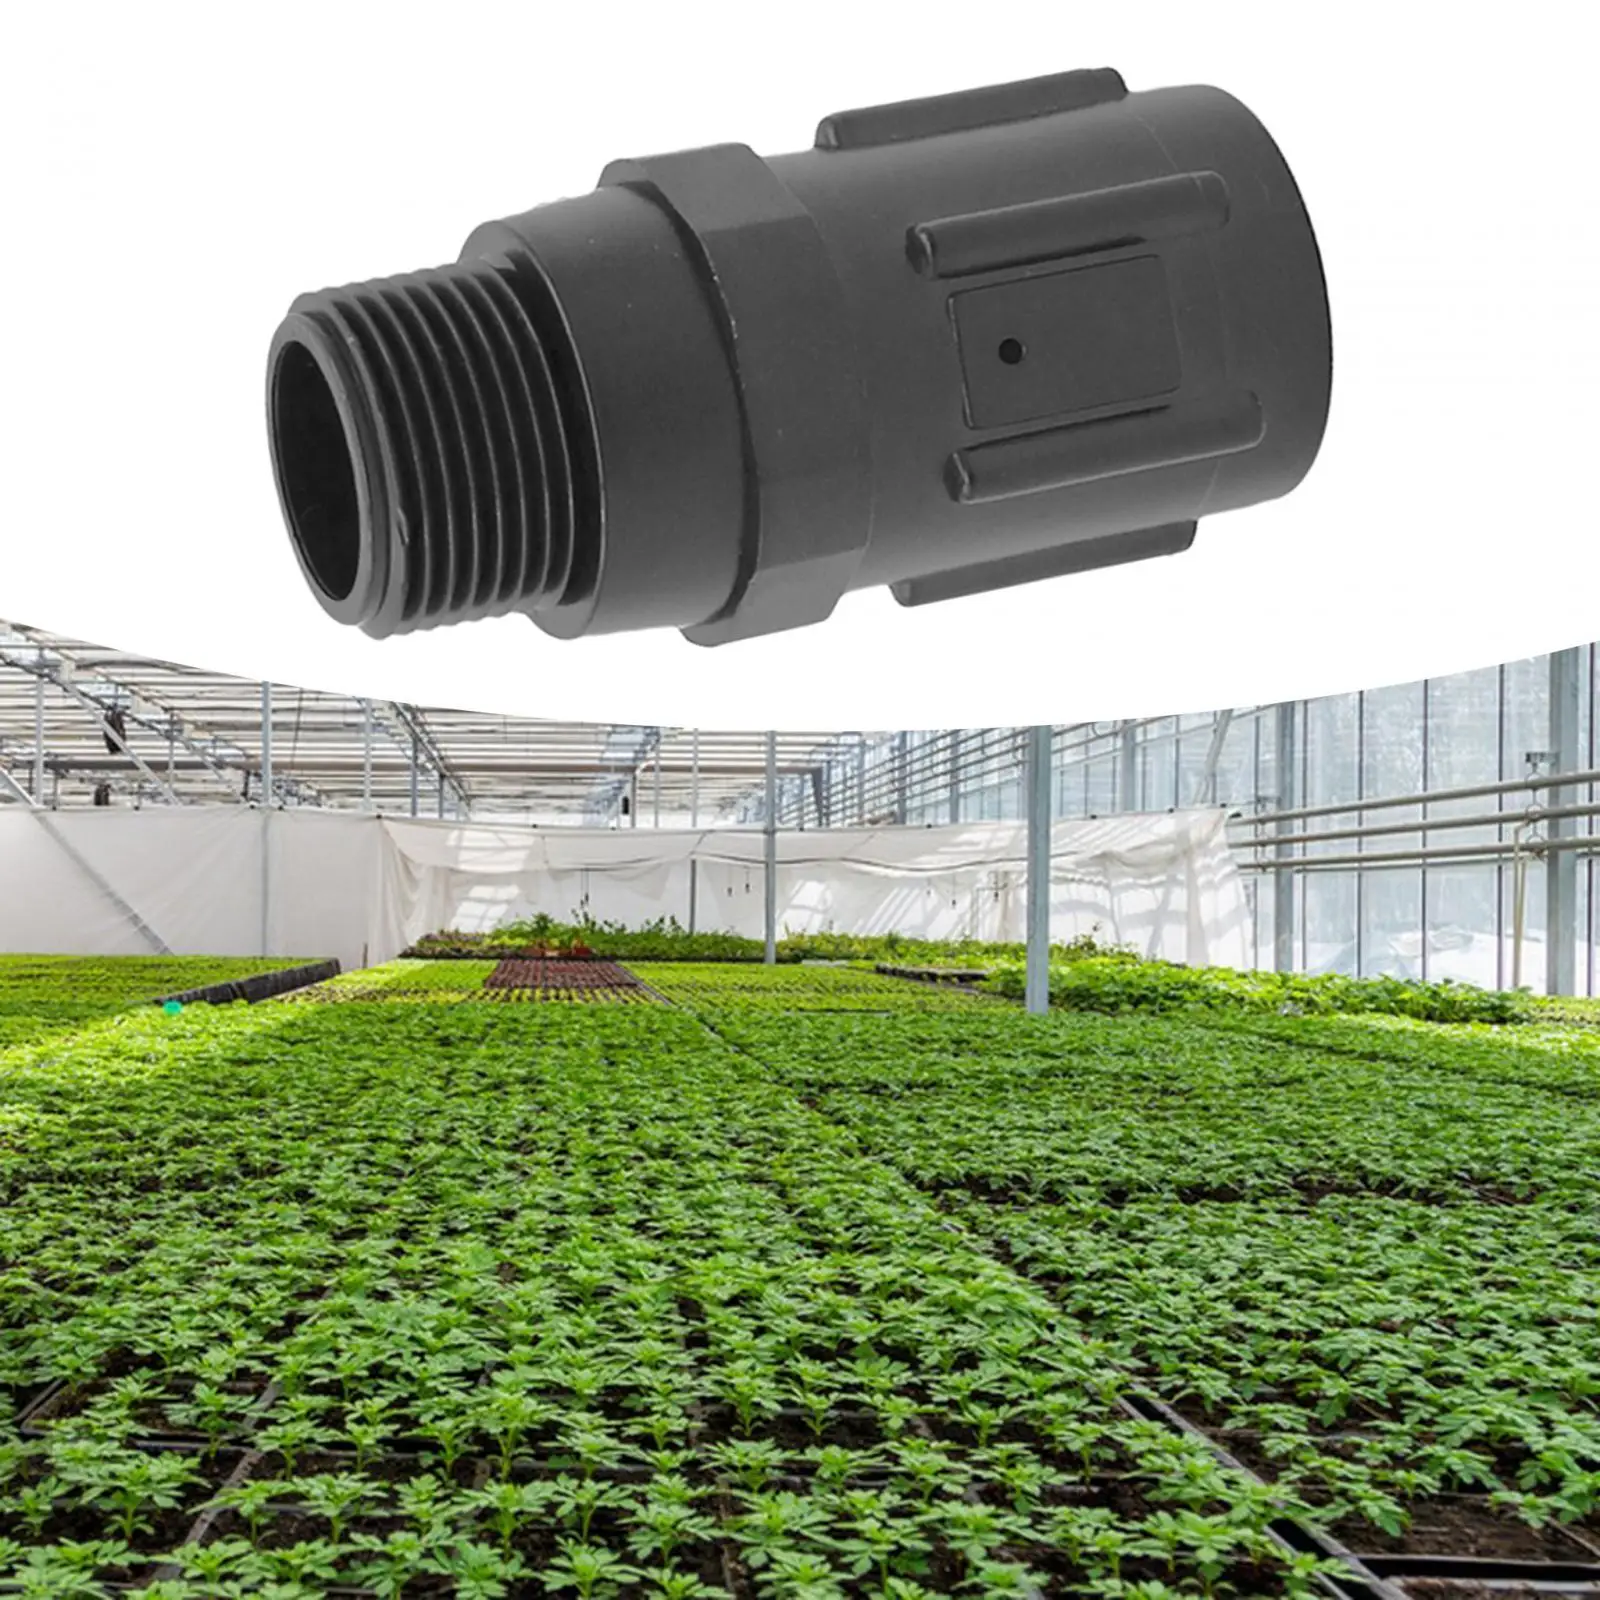 Water Pressure Regulator Filter Drip for Drip Irrigation System High Strength Automated Timer Drip Irrigation Pressure Regulator